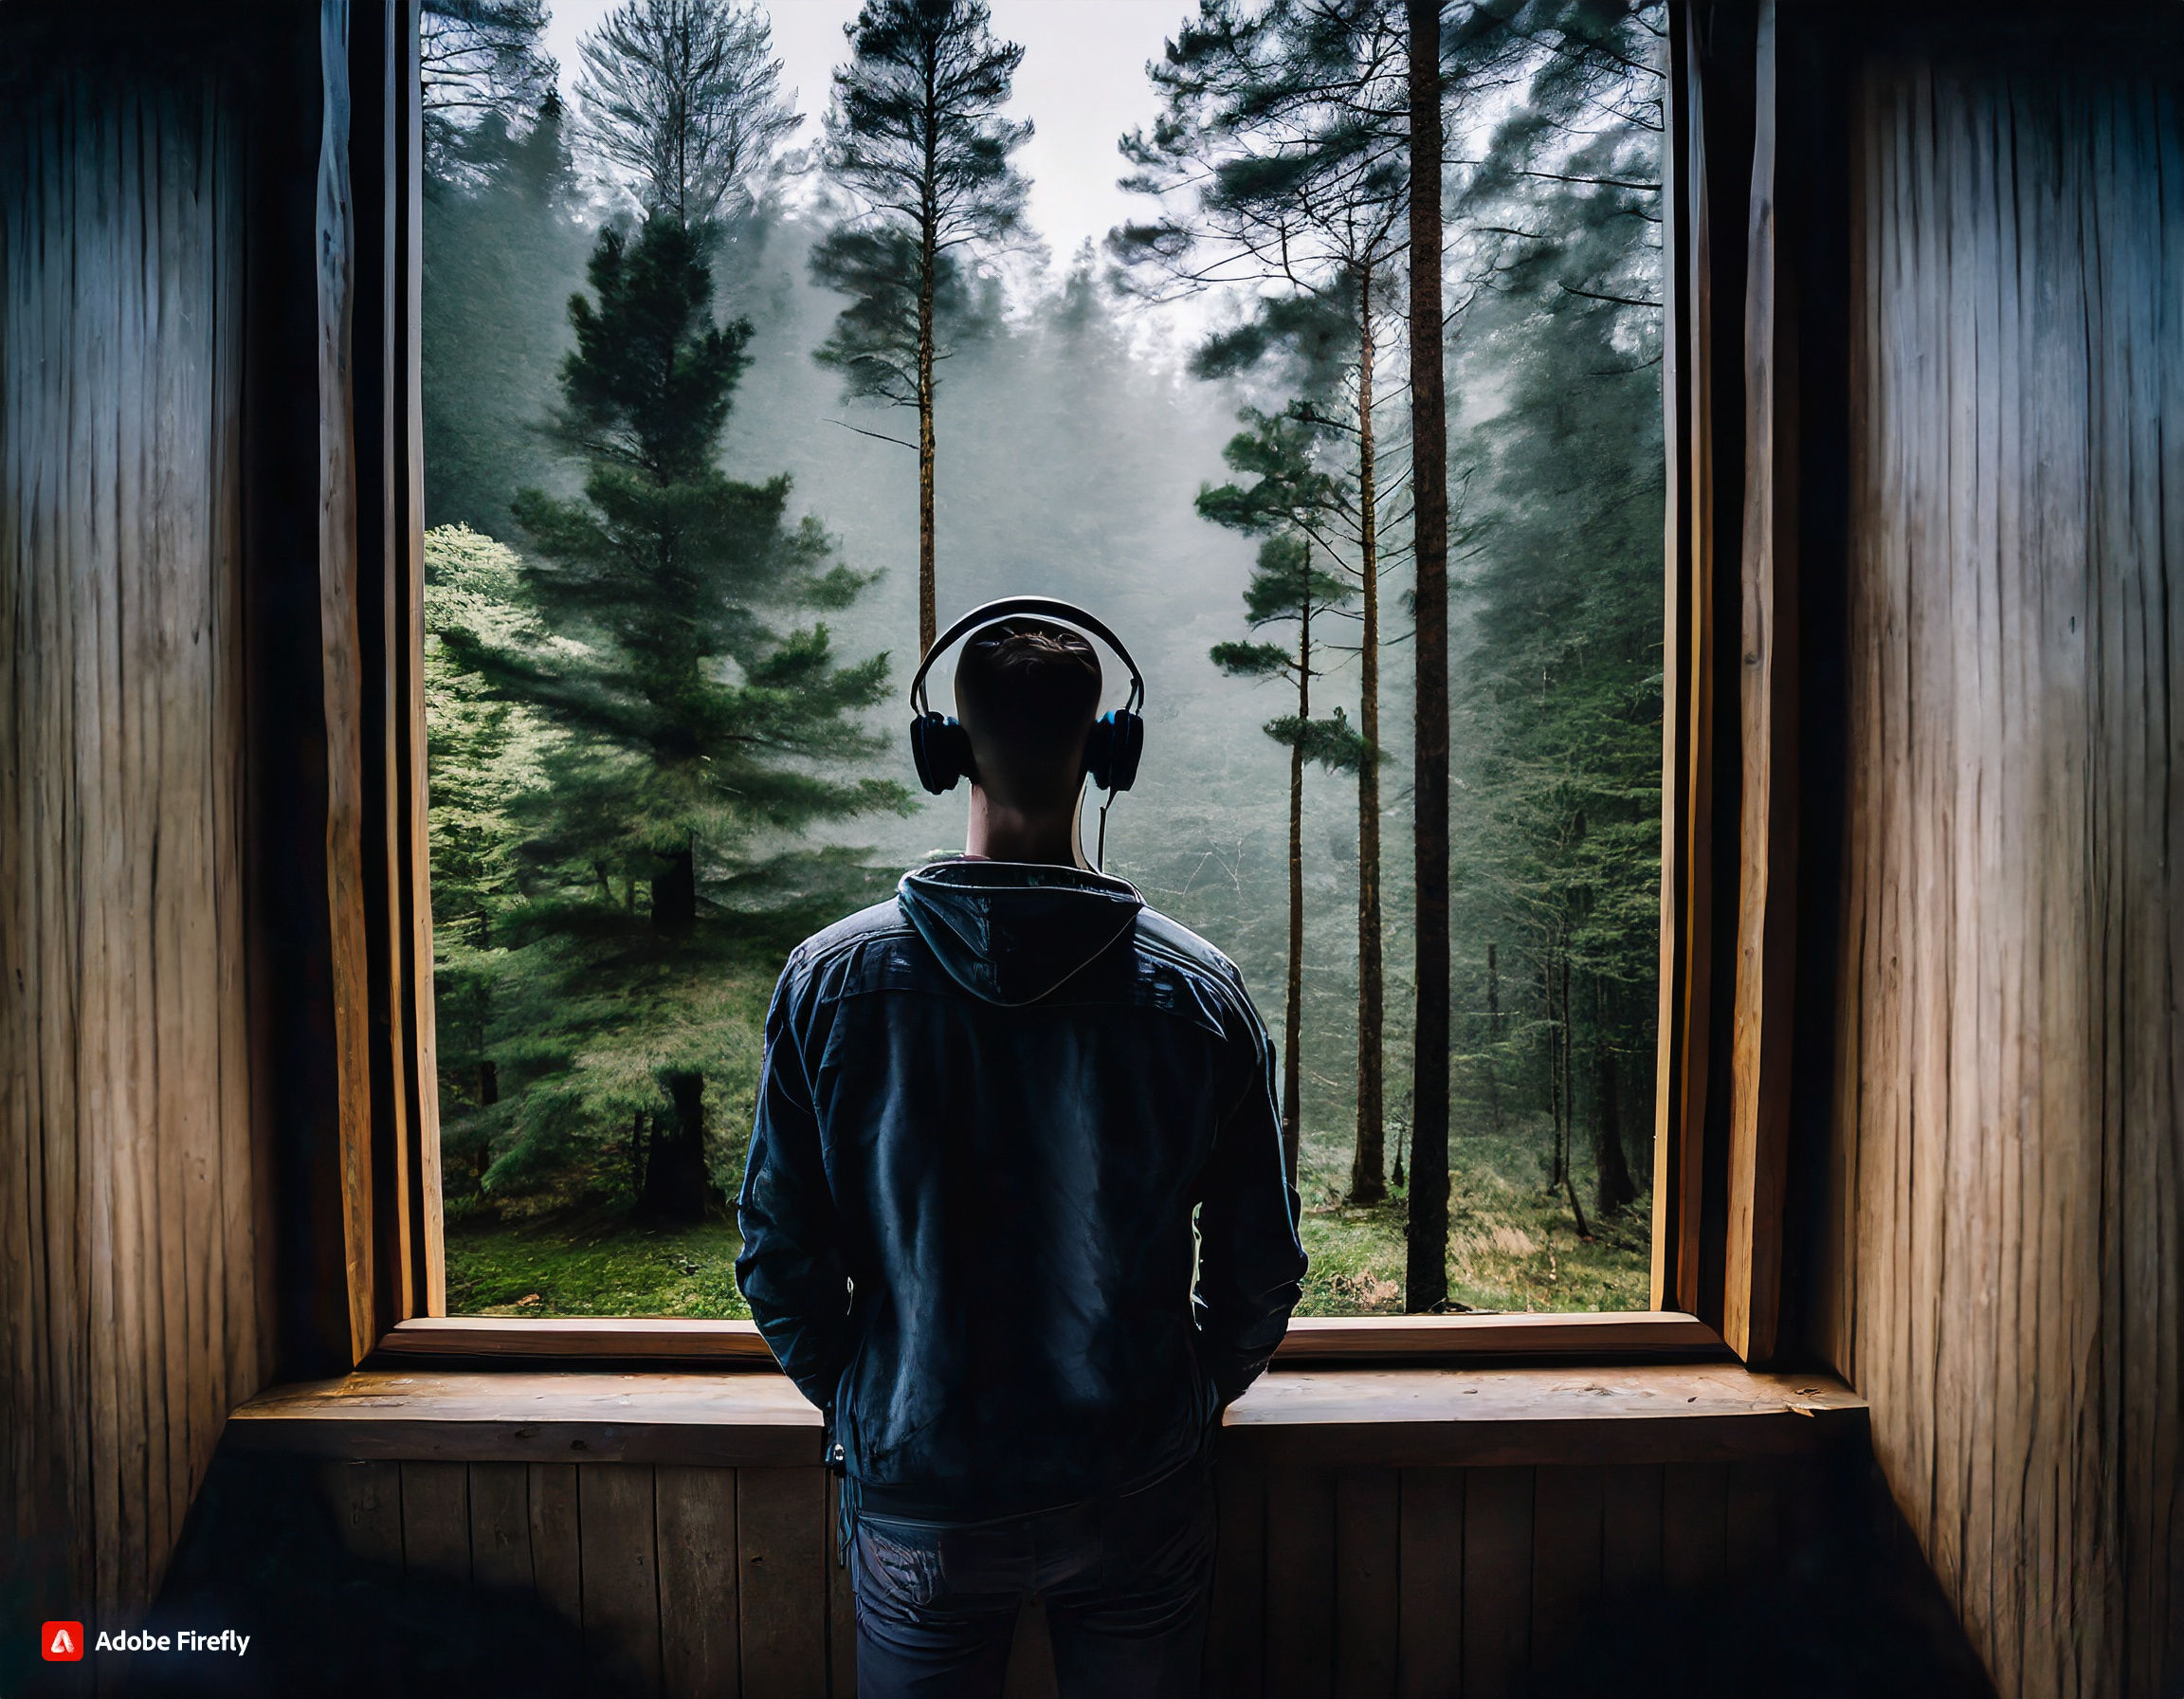 Someone looking by the windows of a dark forest scene; he have headphone